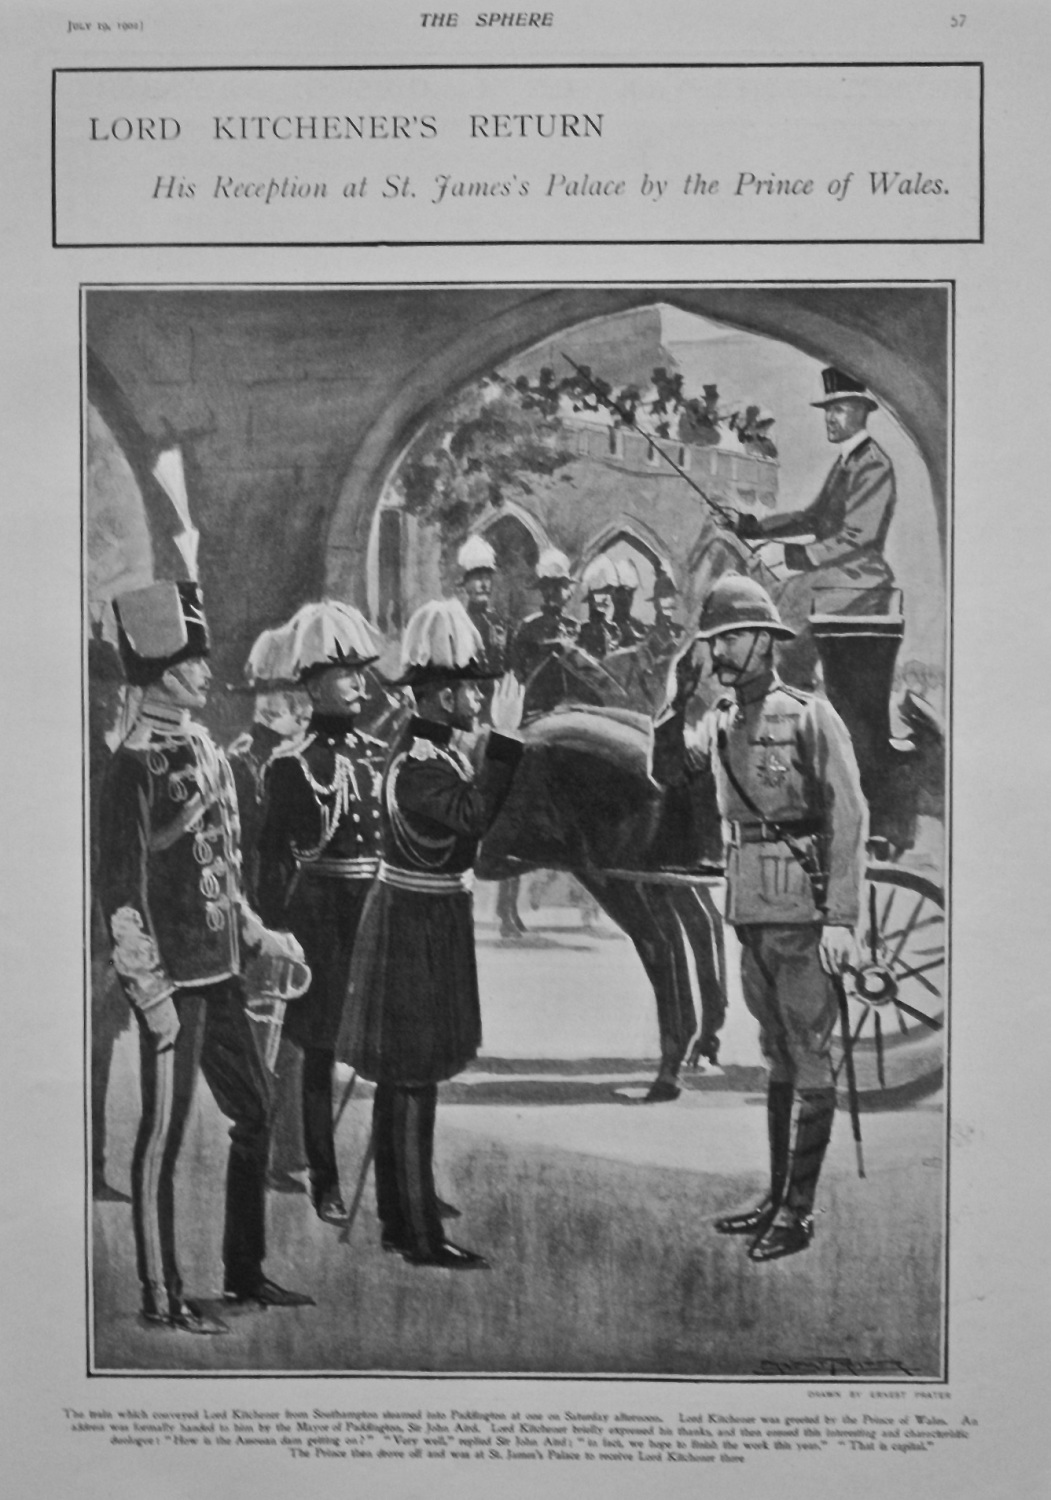 Lord Kitchener's Return : His Reception at St. James's Palace by the Prince